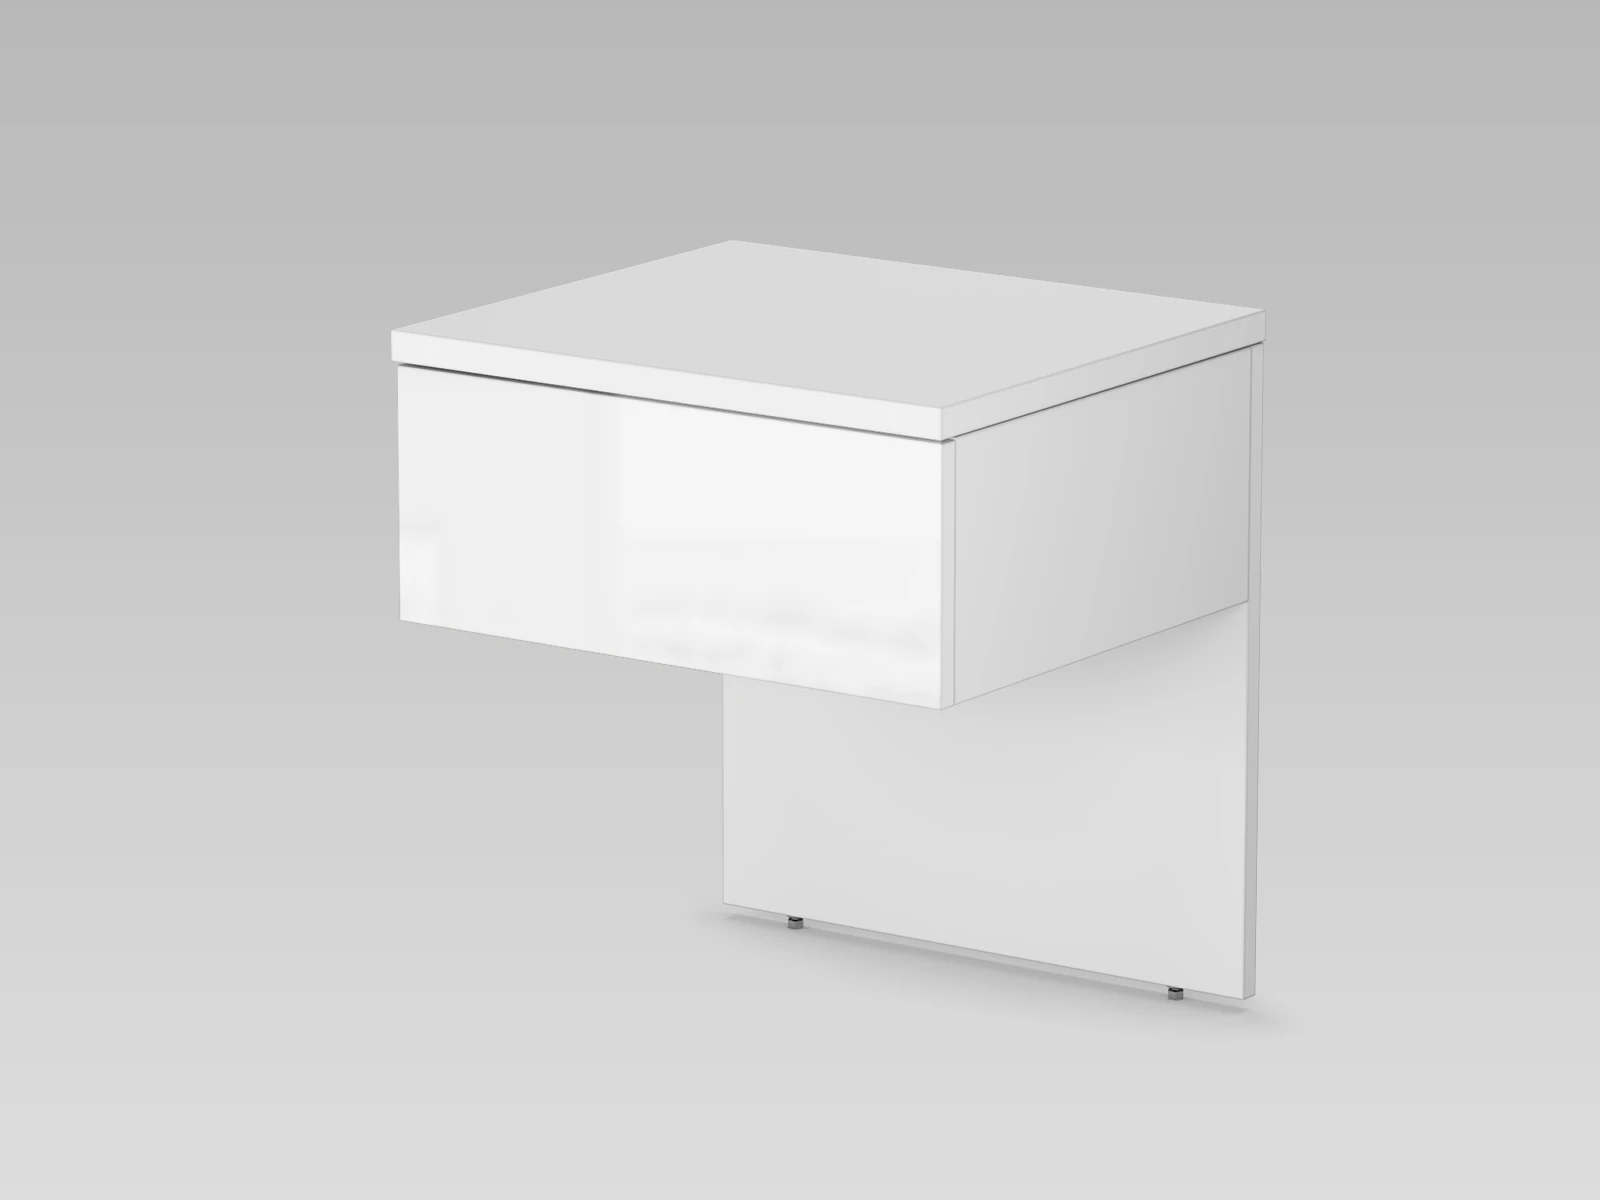 2 Bedside table Classic White / White Gloss